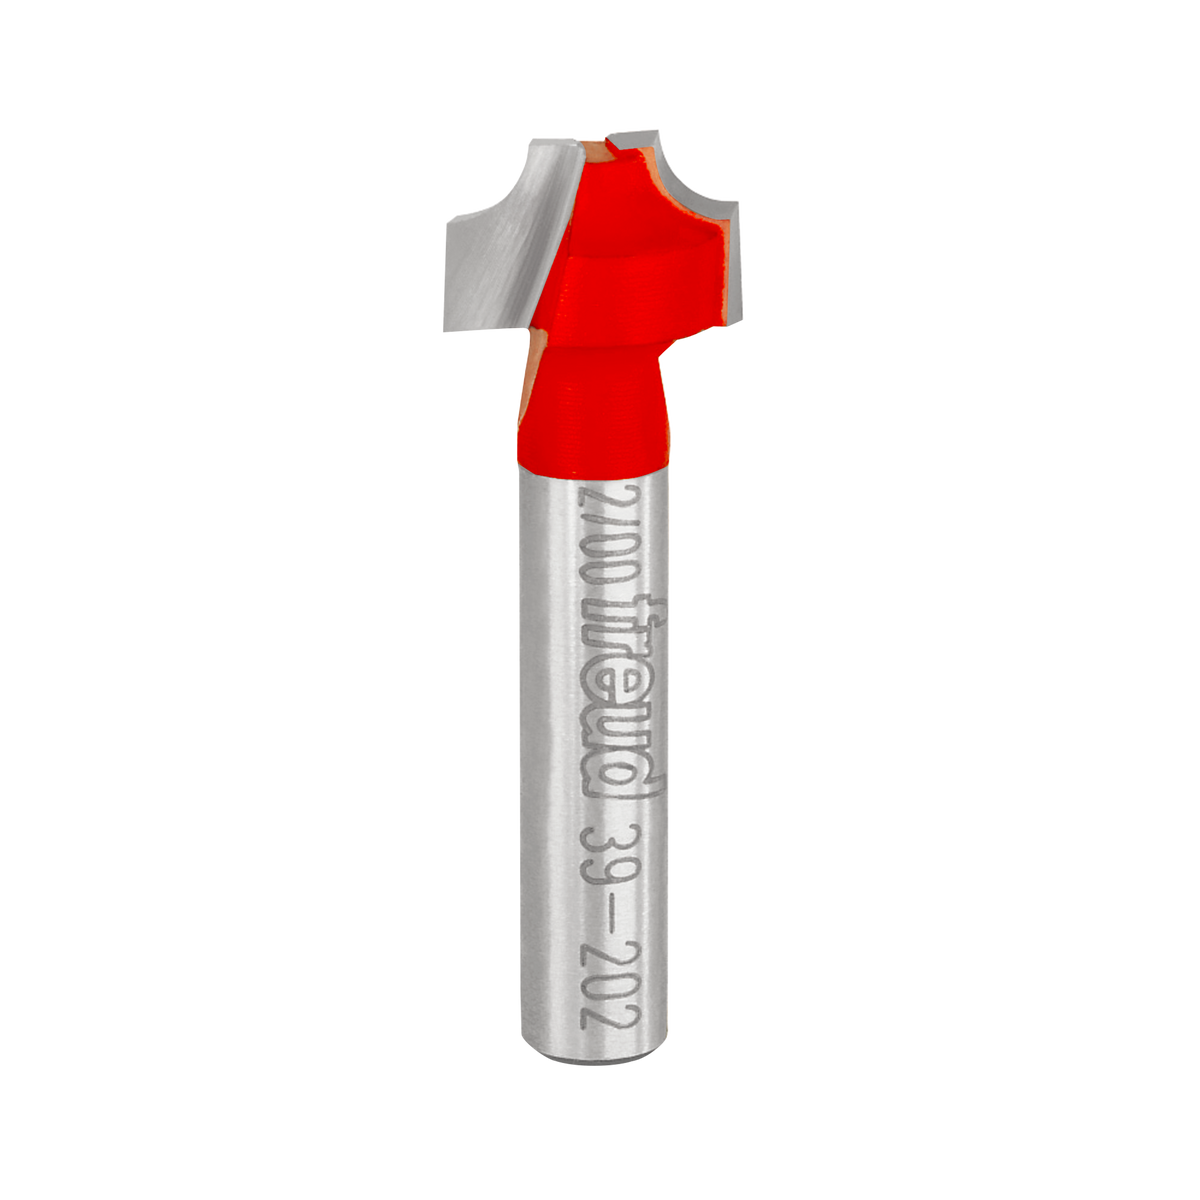 Freud Ovolo Router Bits